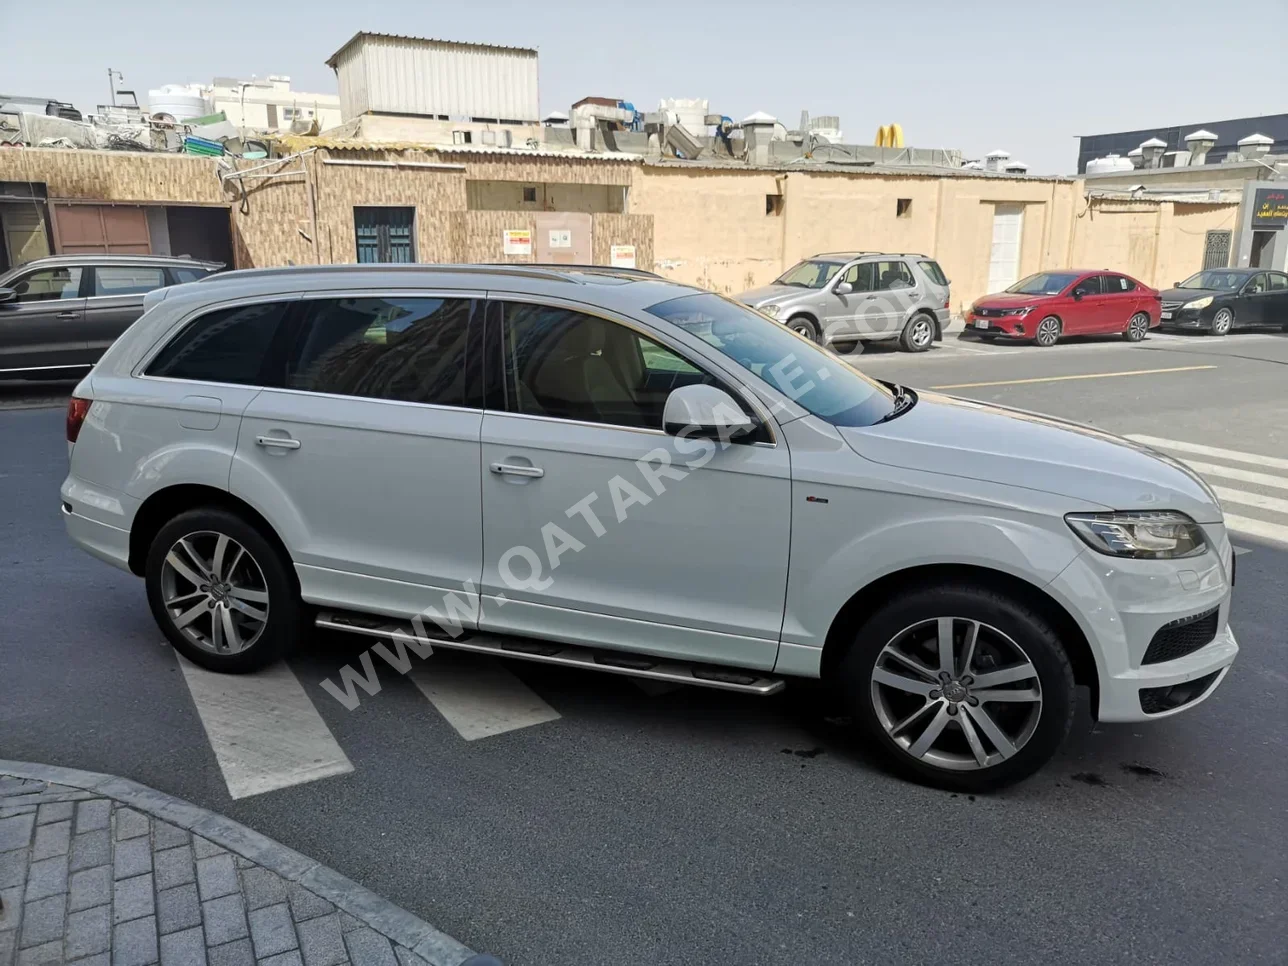 Audi  Q7  S-Line  2016  Automatic  57,000 Km  6 Cylinder  Four Wheel Drive (4WD)  SUV  White